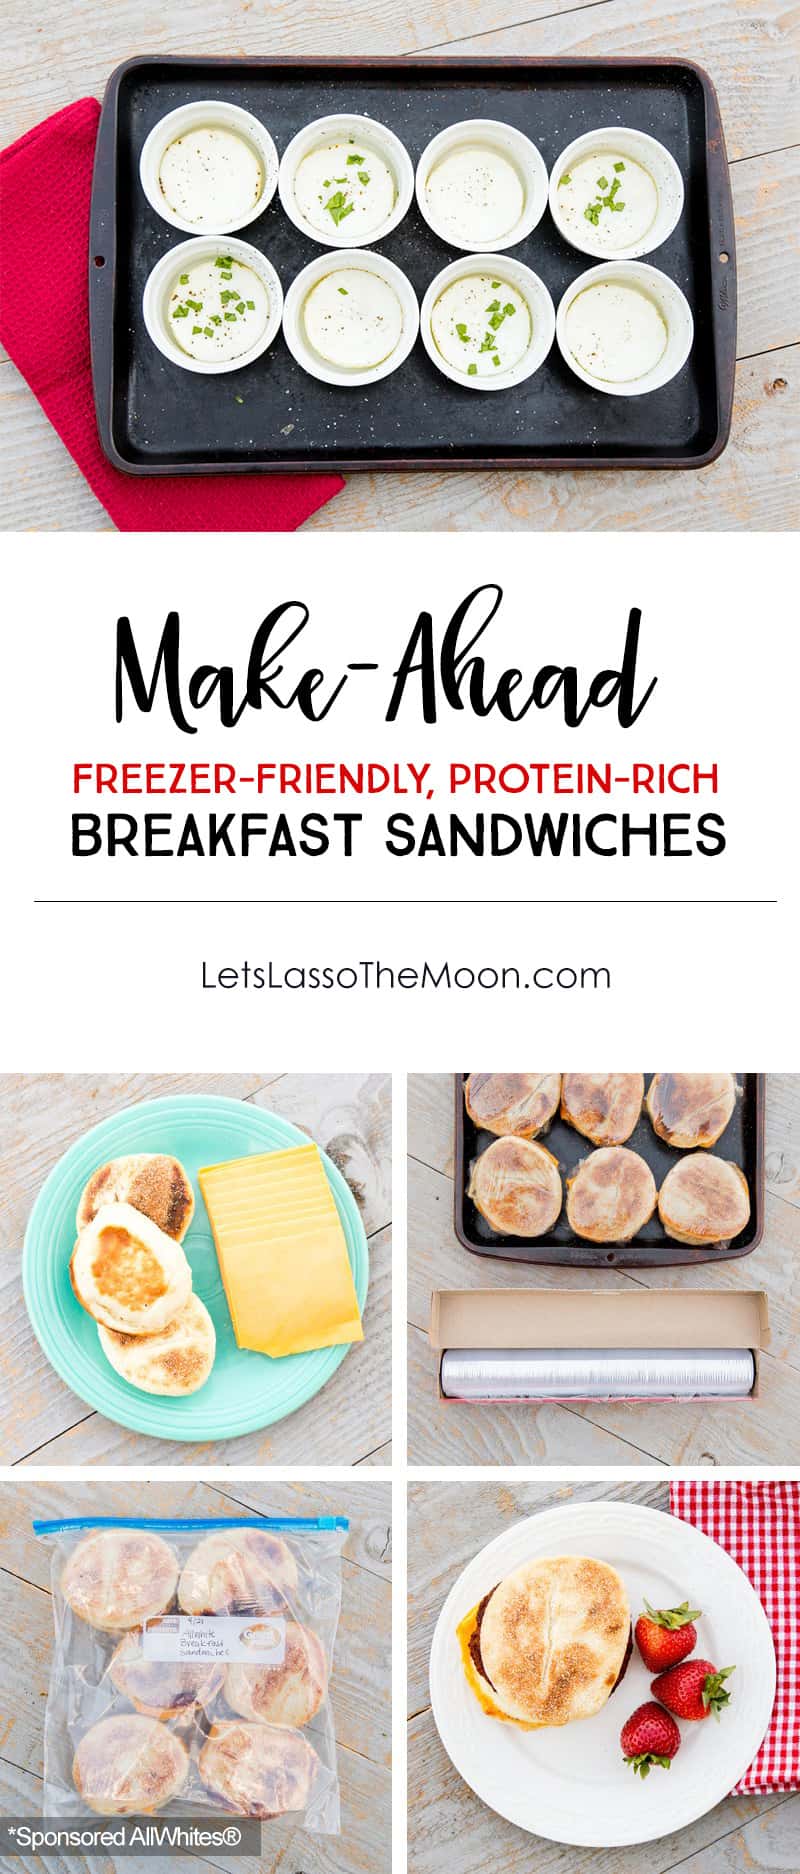 These high-protein, freezer-friendly breakfast sandwiches are the perfect on-the-go kickstart. You can use different toppings for everyone in your family- sausage, bacon, spinach, cheese. There are no rules. *Keep these on hand and you'll never skip breakfast again.